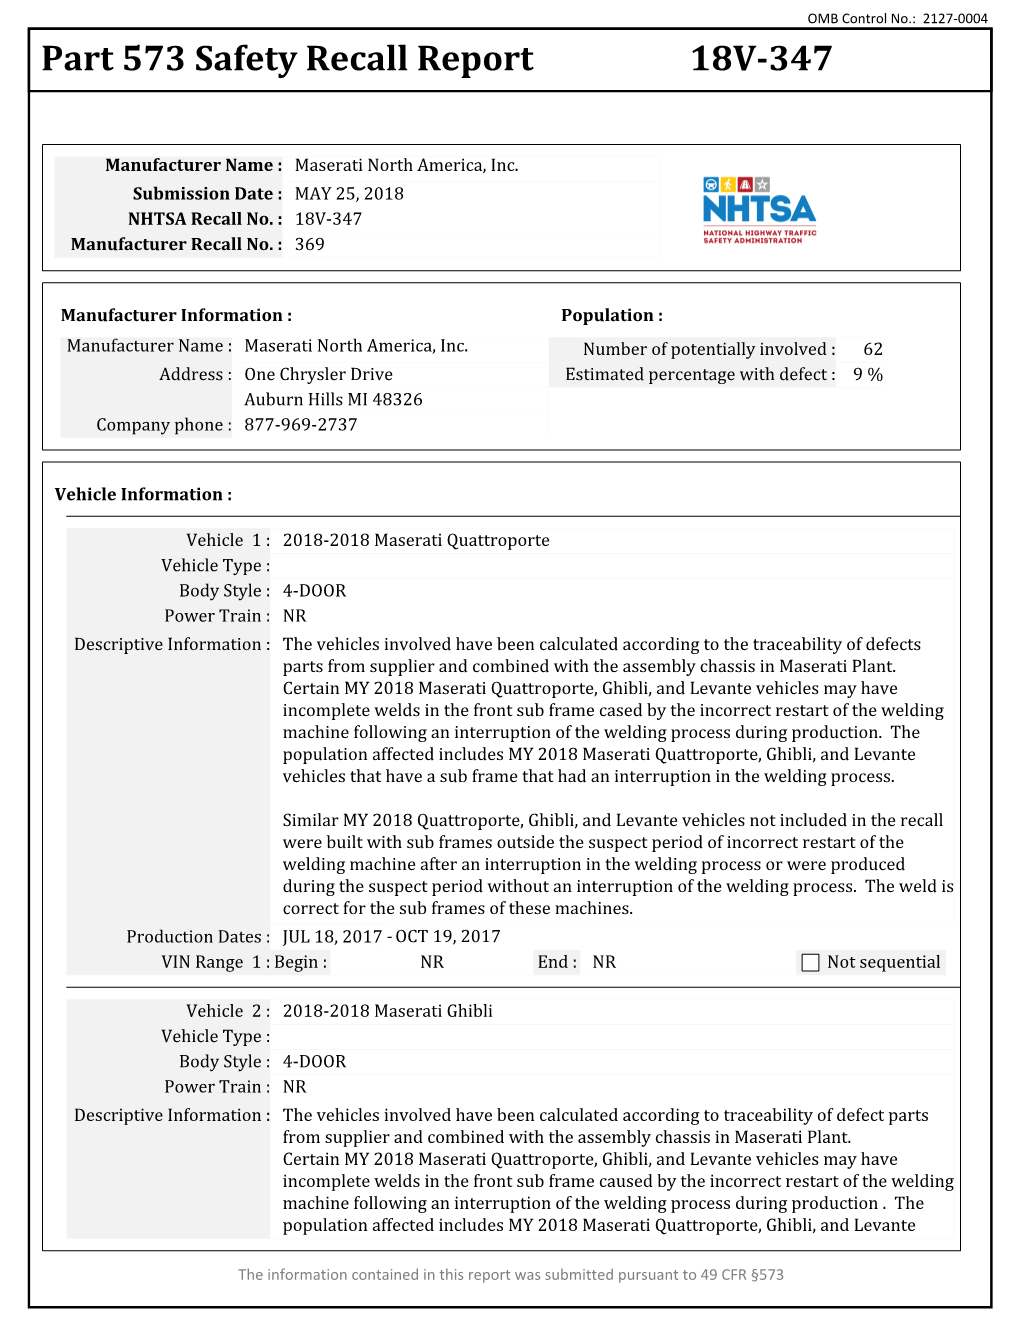 Part 573 Safety Recall Report 18V-347